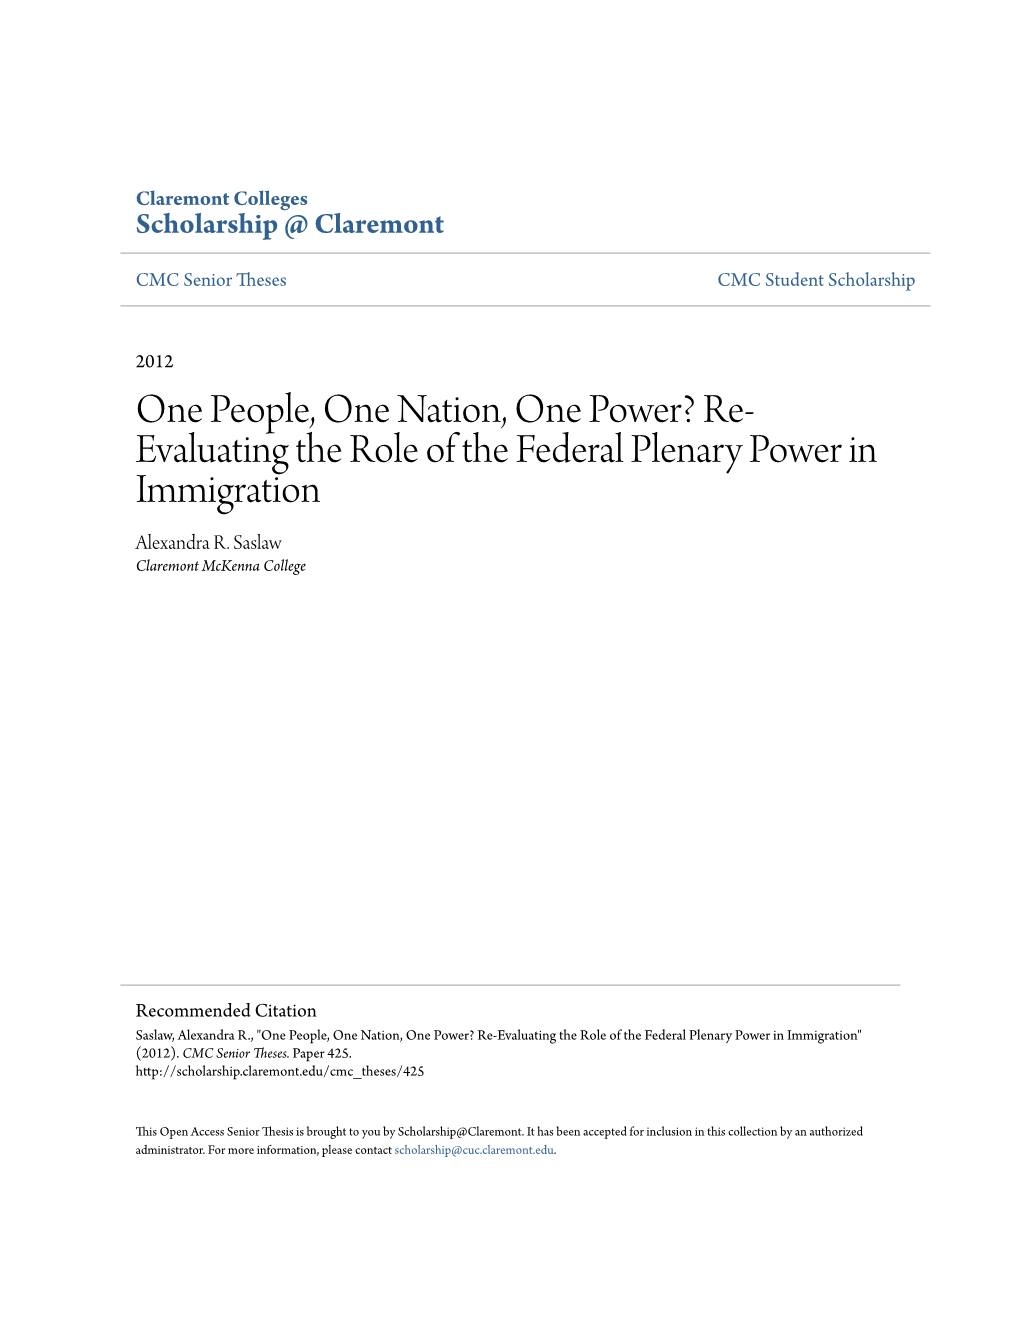 One People, One Nation, One Power? Re- Evaluating the Role of the Federal Plenary Power in Immigration Alexandra R